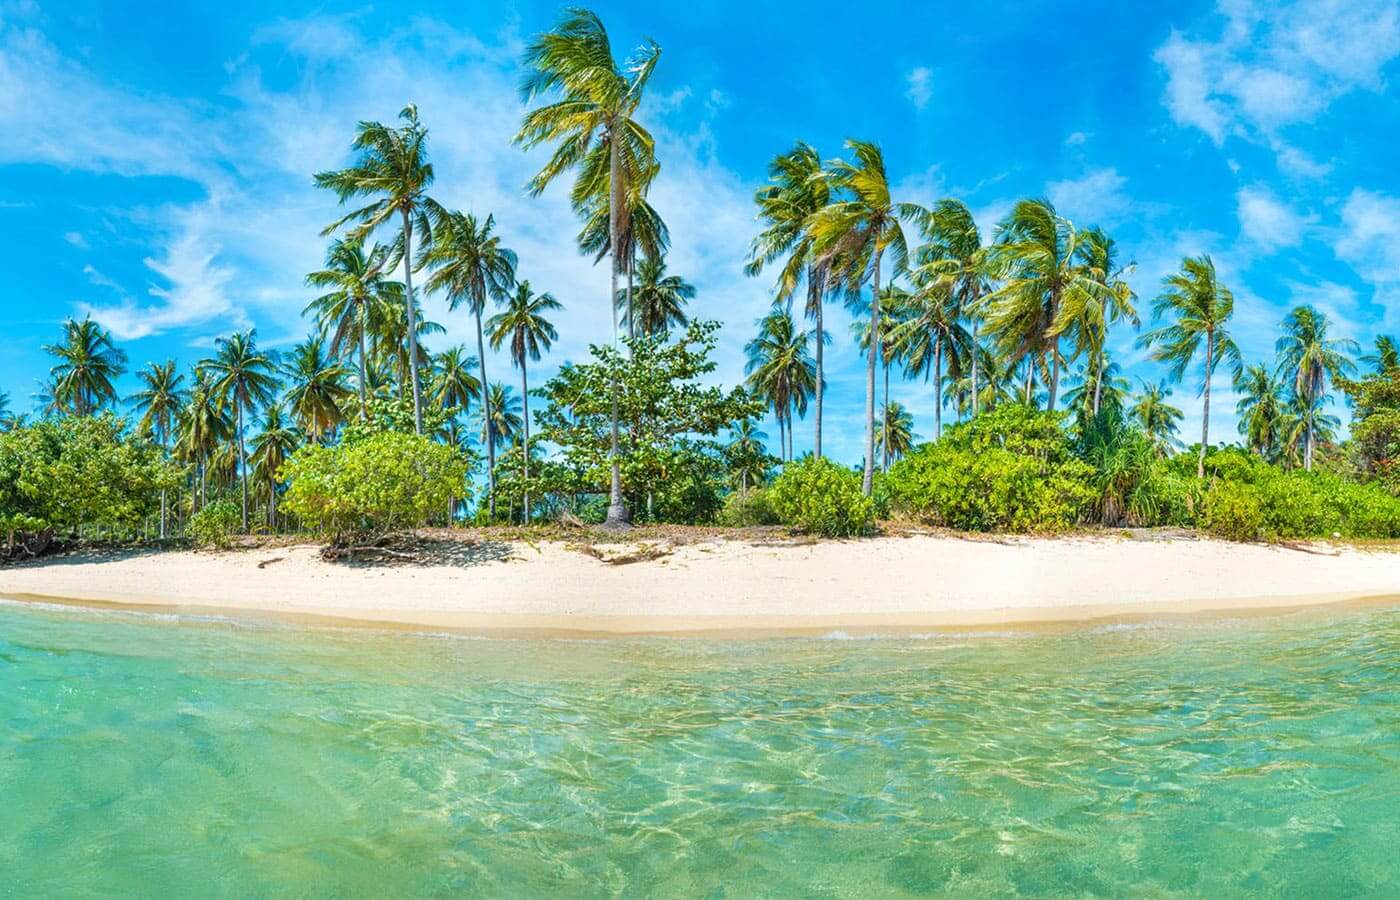 A beautiful sandy beach with tropical palm trees